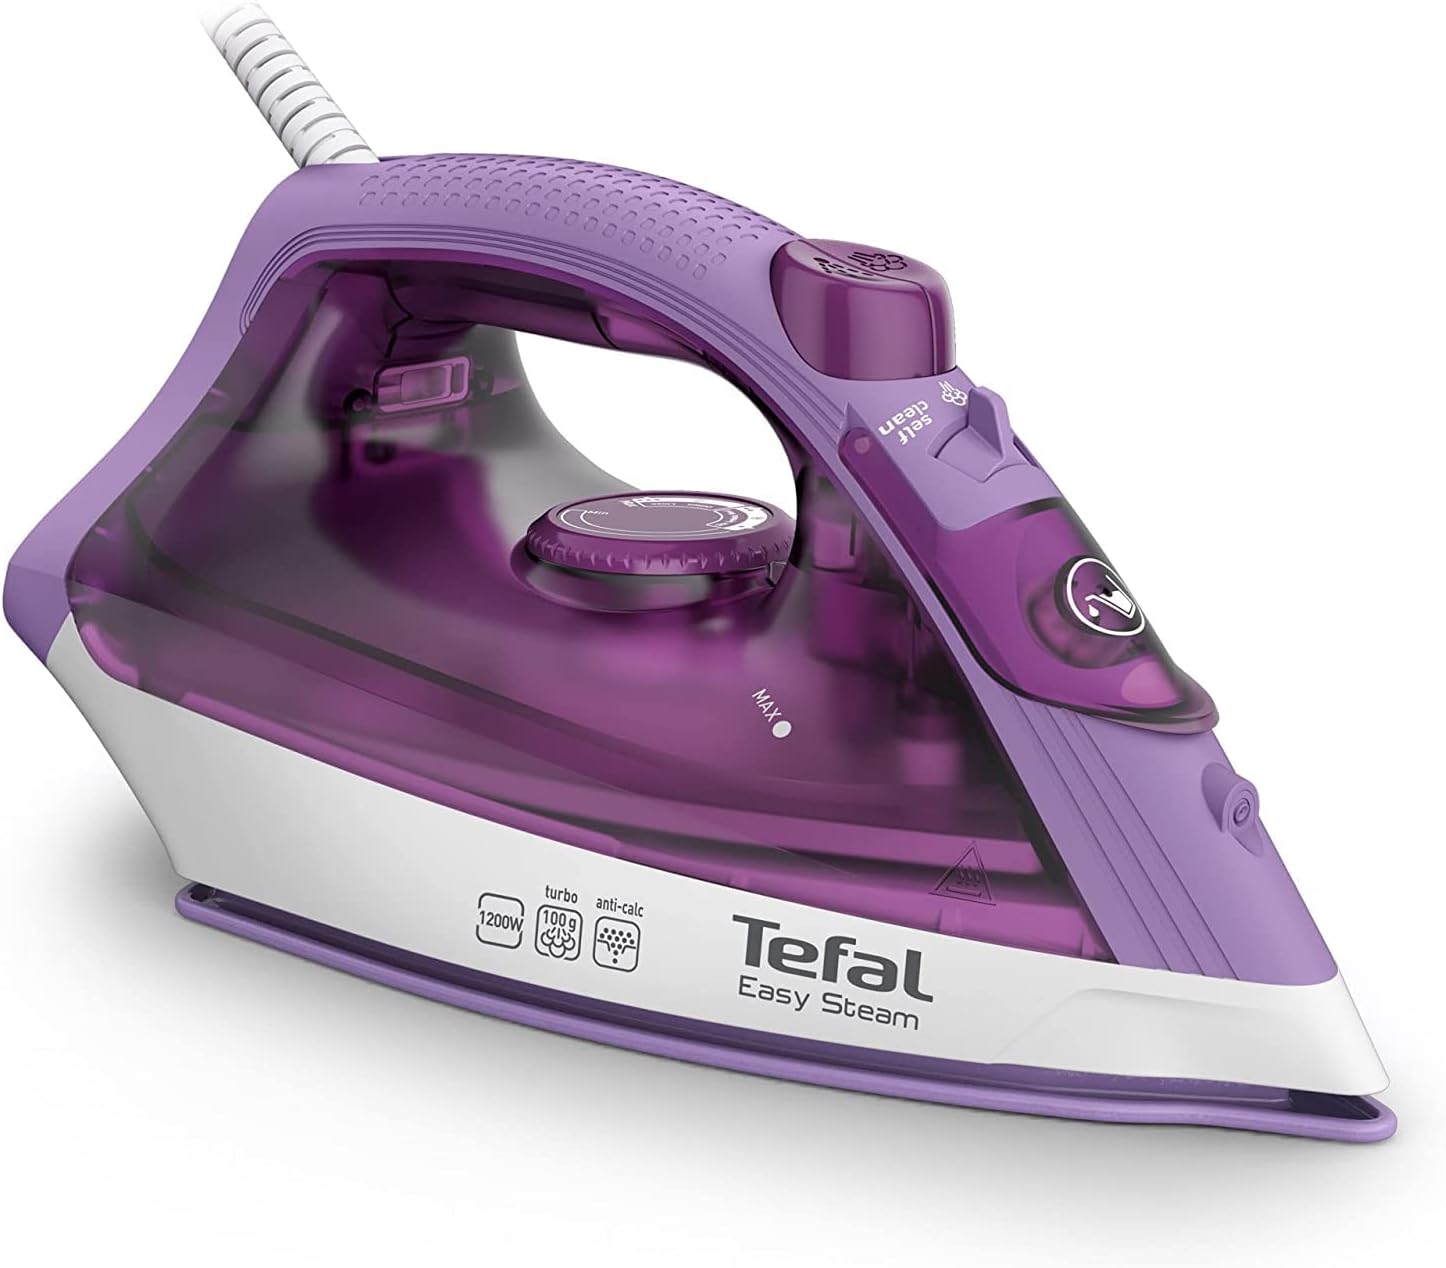 Tefal steam iron with continuous steam flow of 100 g/min, 1200 W capacity - 220 ml - 50/60 Hz - Easy Steam FV1953M0